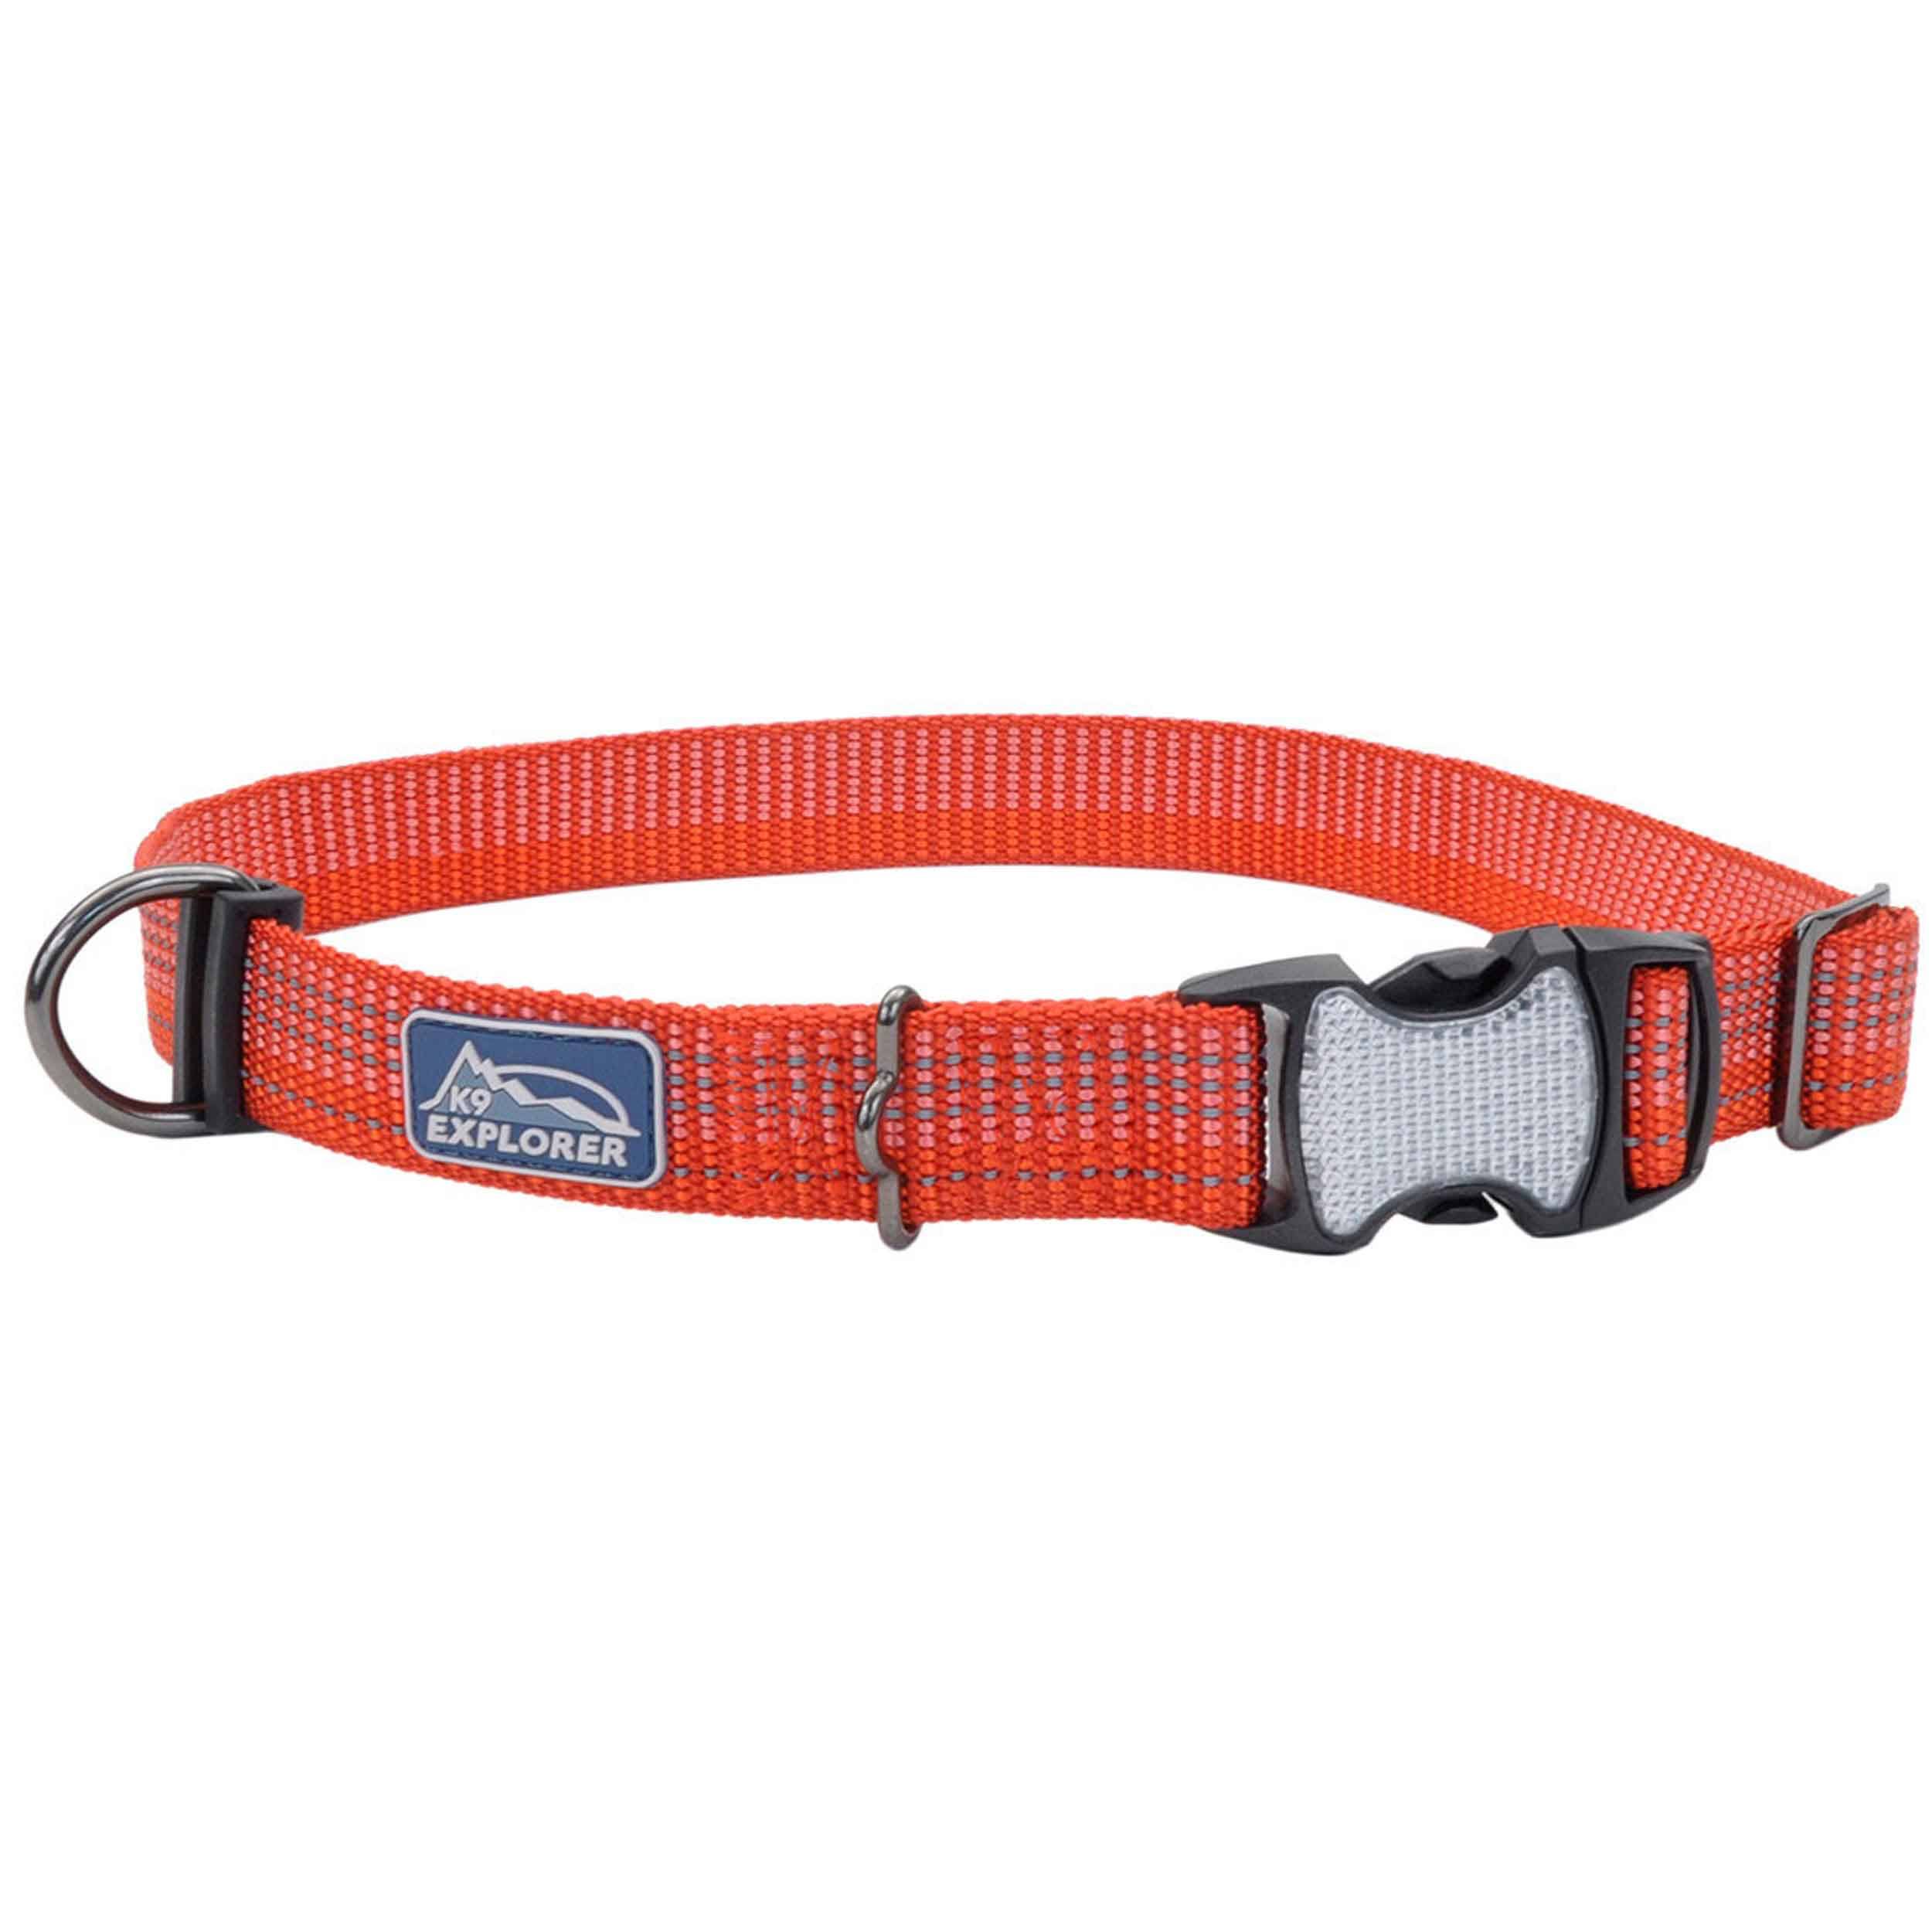 K9 Explorer Brights Reflective Adjustable Dog Collar, Canyon, 5/8-in x 10-14-in